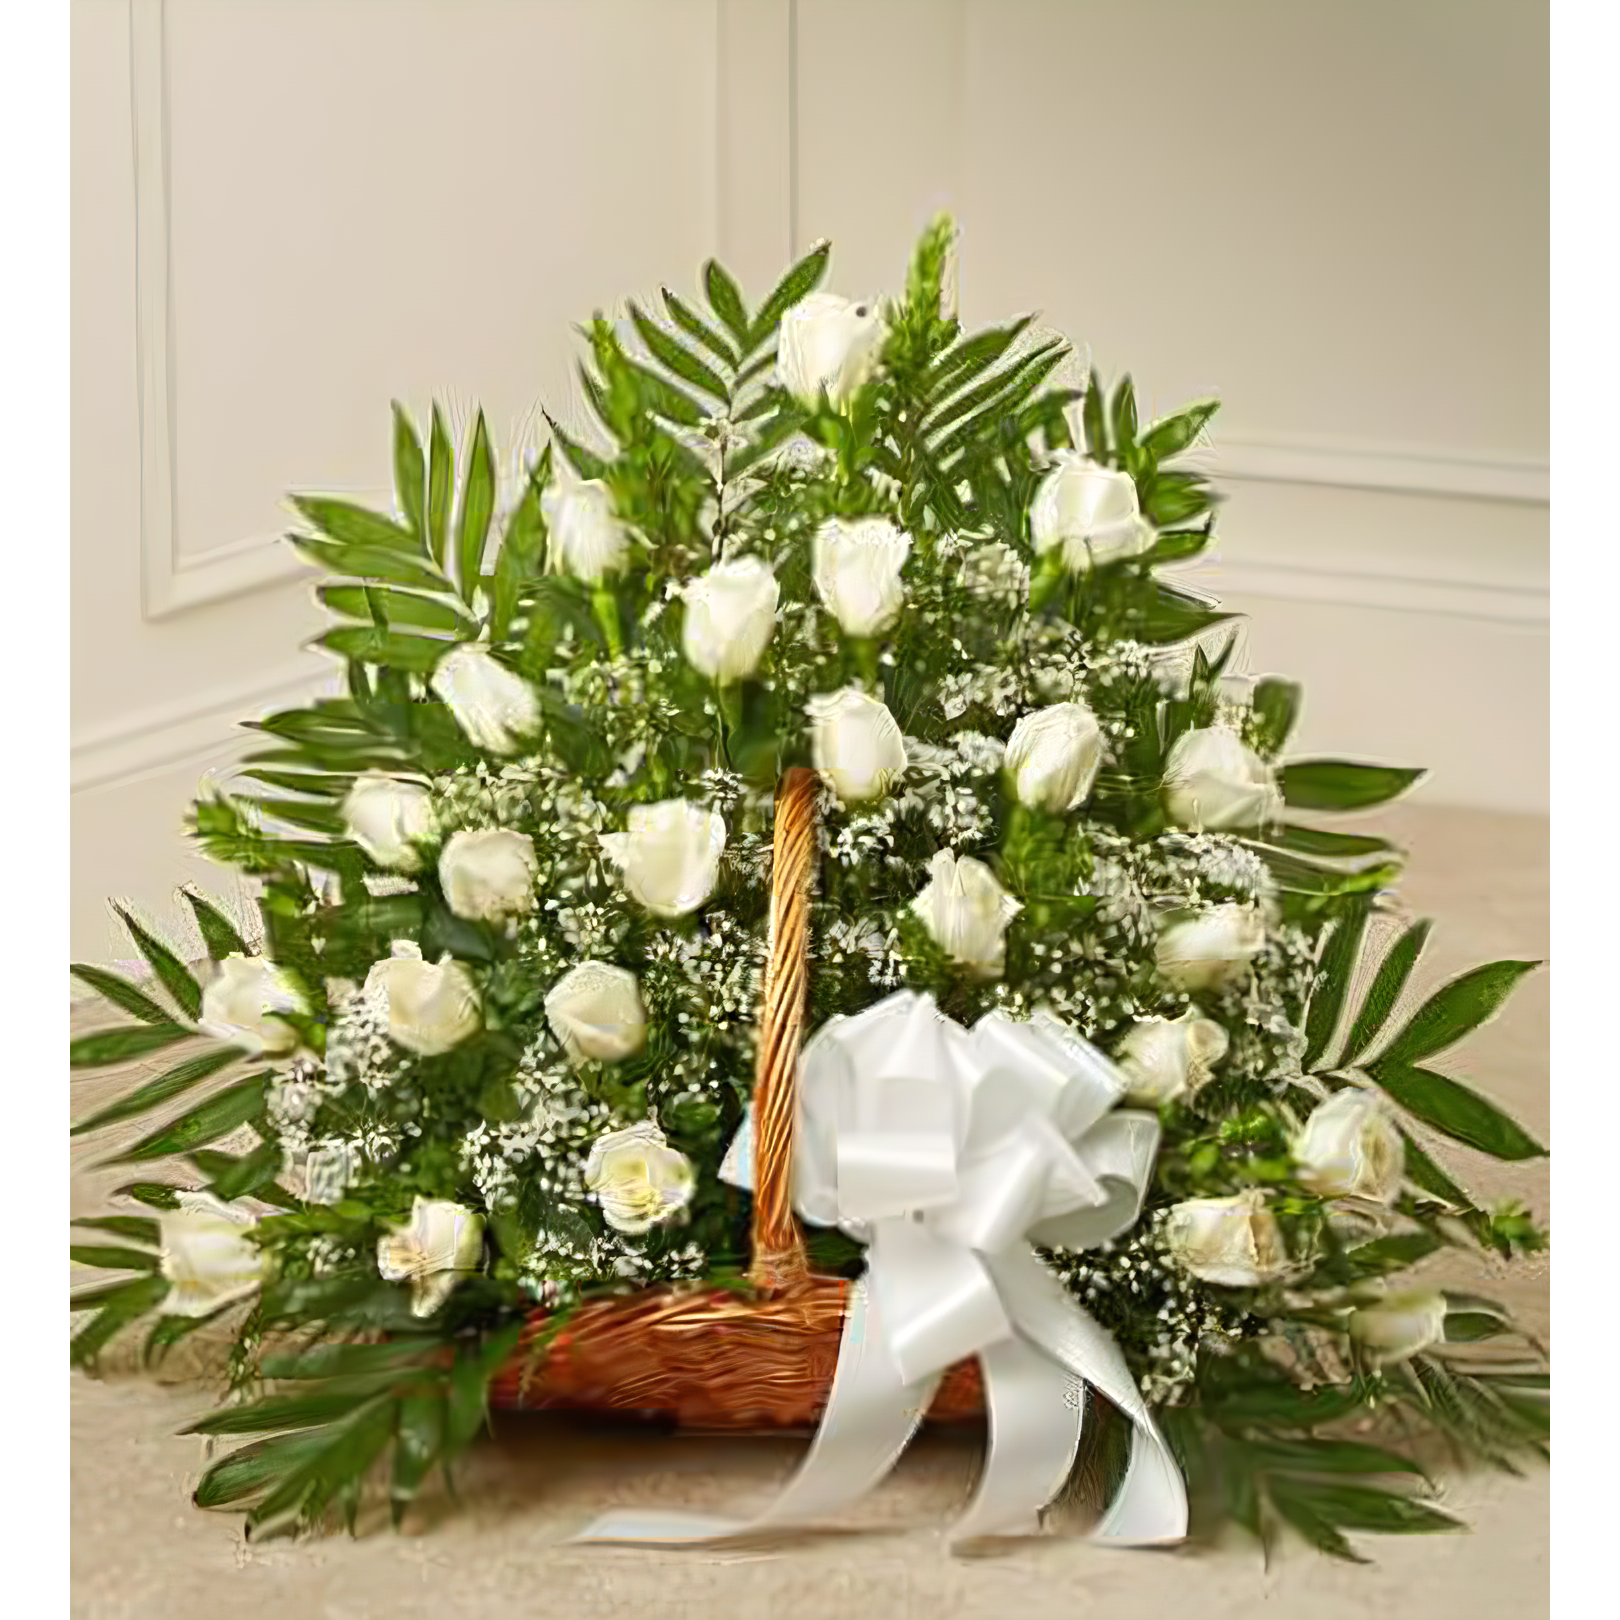 Sincerest Sympathies Fireside Basket - White - Funeral > For the Service